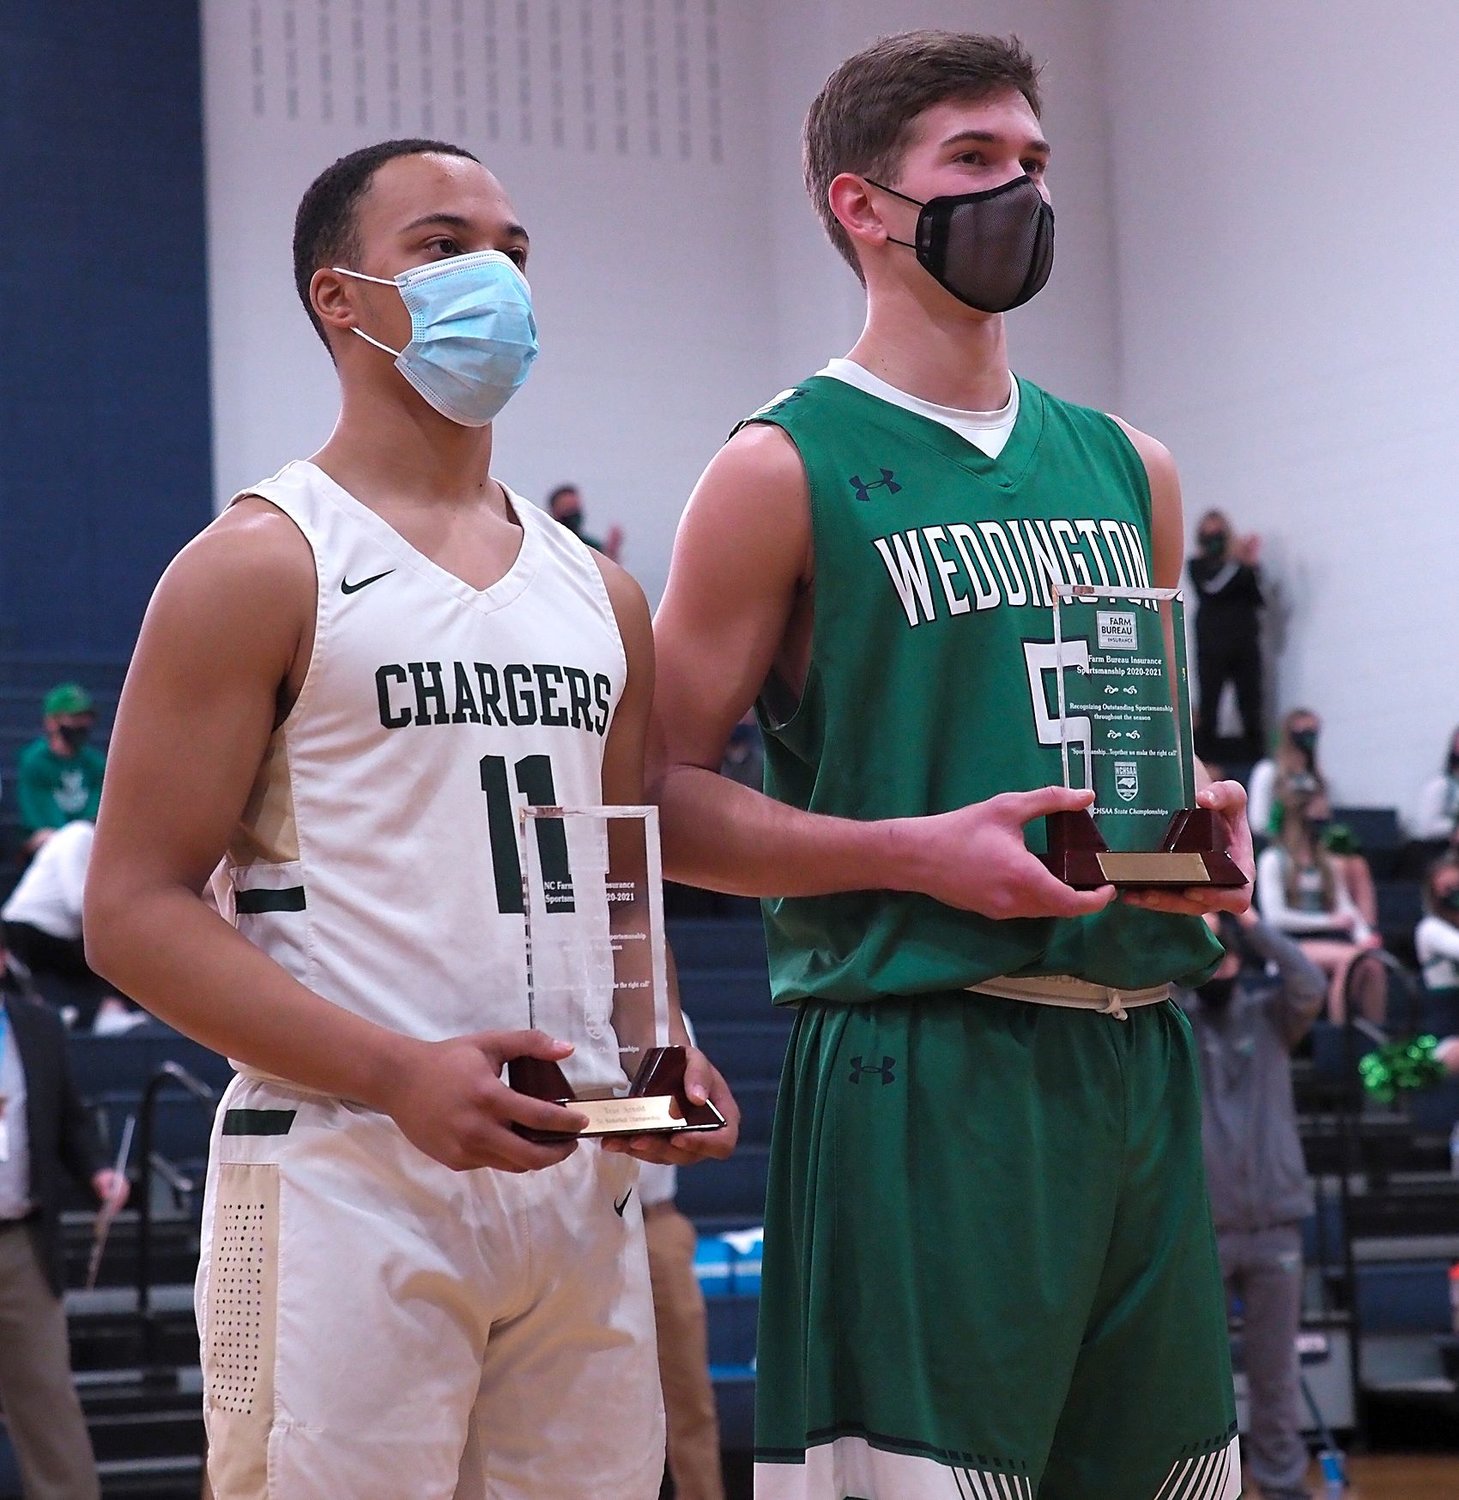 Northwood senior guard Troy Arnold (11) and Weddington senior center Caleb Wetherbee pose for photos after earning the NCHSAA's Sportsmanship Award prior to Weddington's 56-47 win over Northwood in the state title game on Saturday.